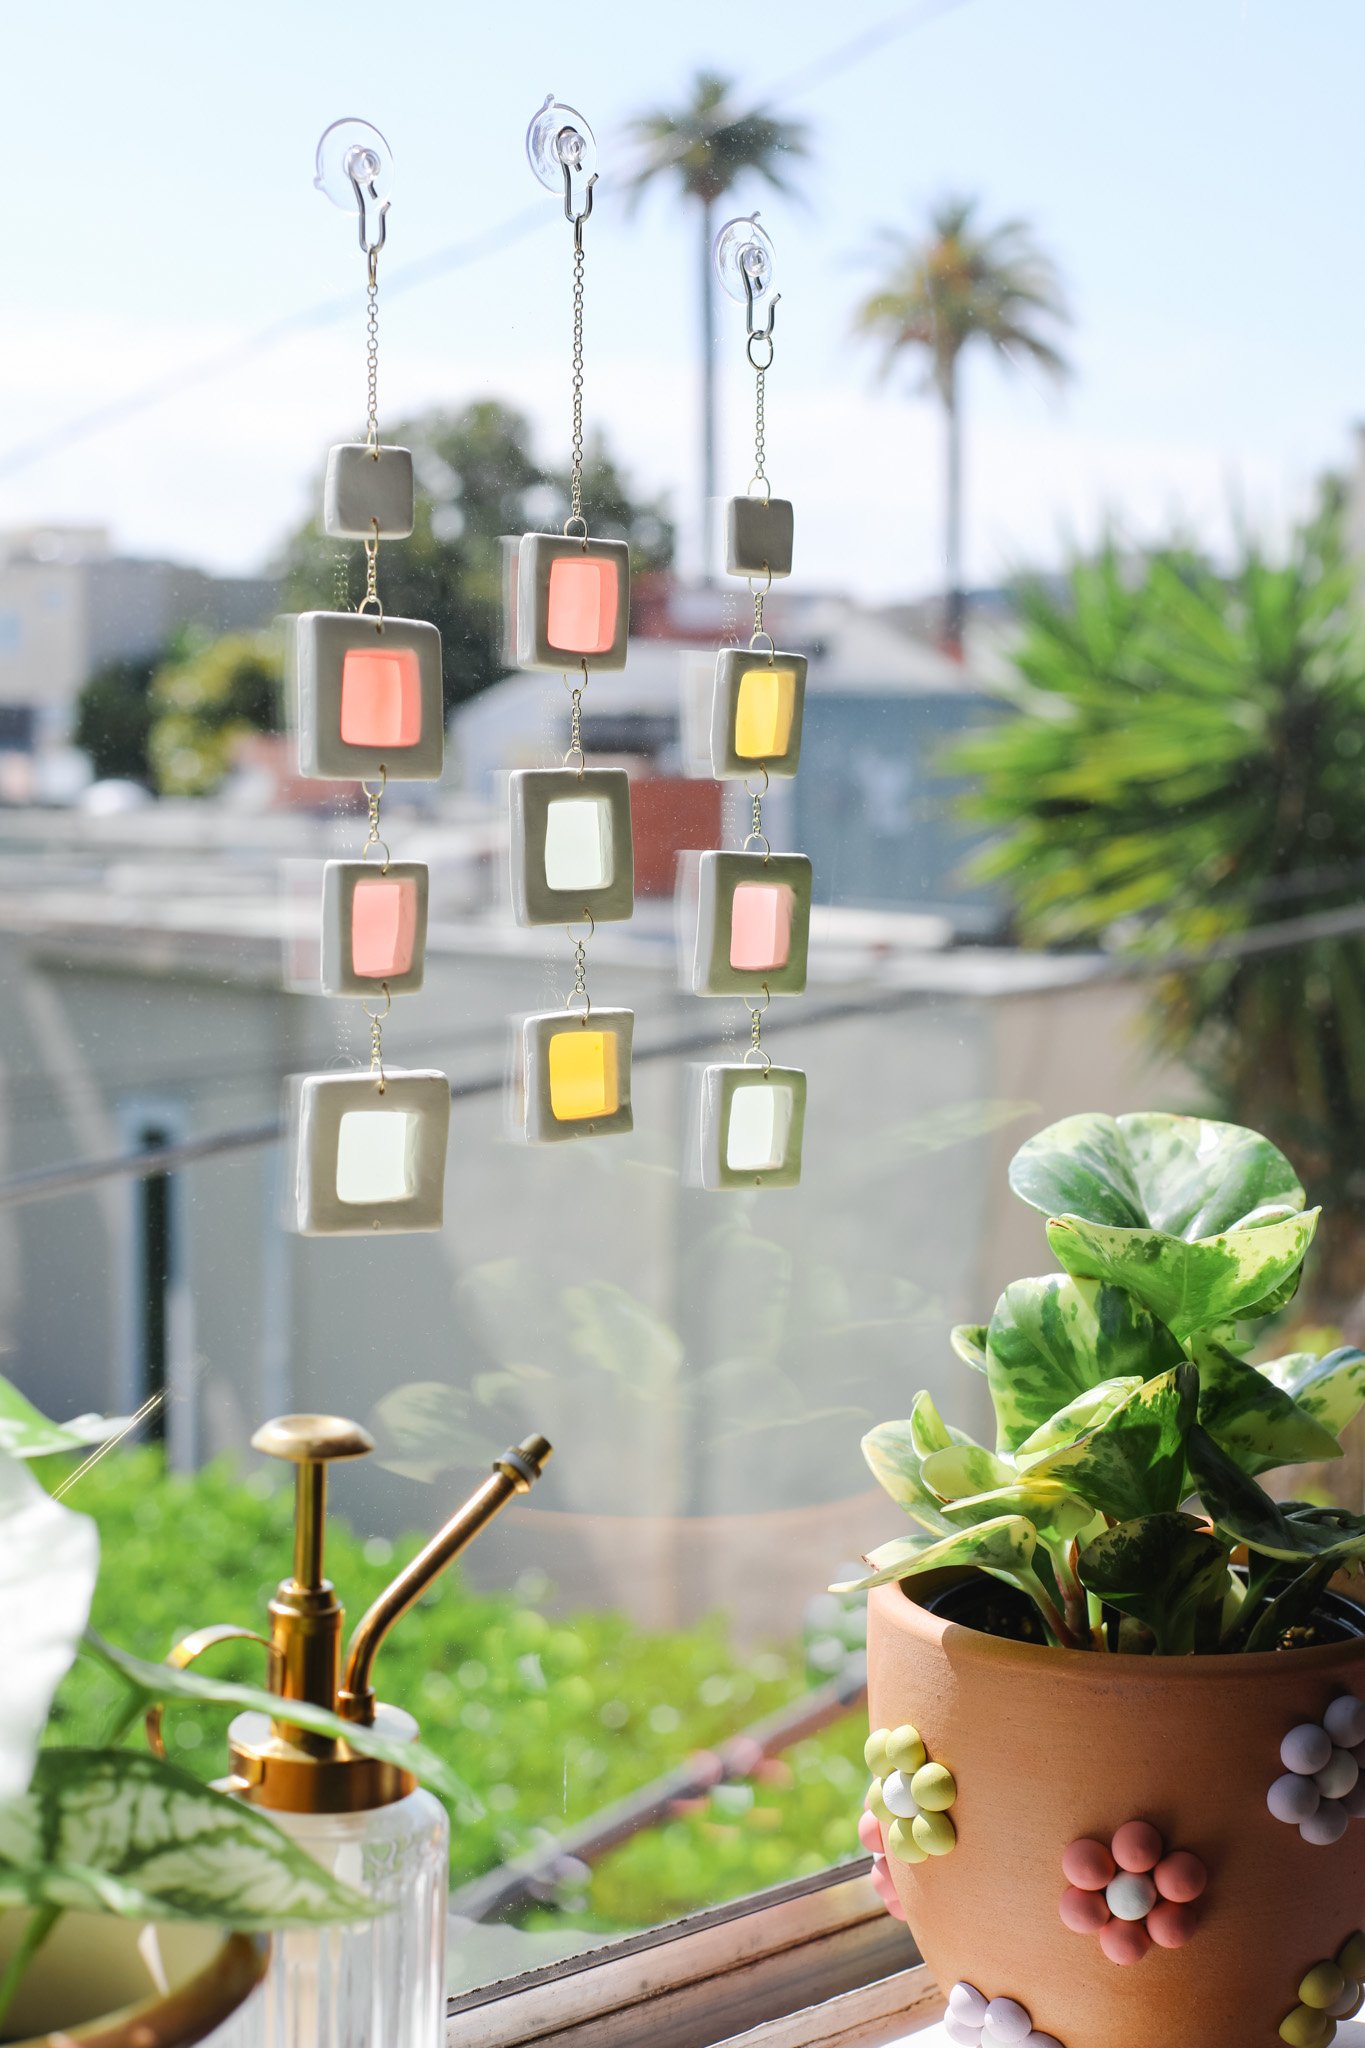 Faux Stained Glass Suncatcher - Craft to Go!